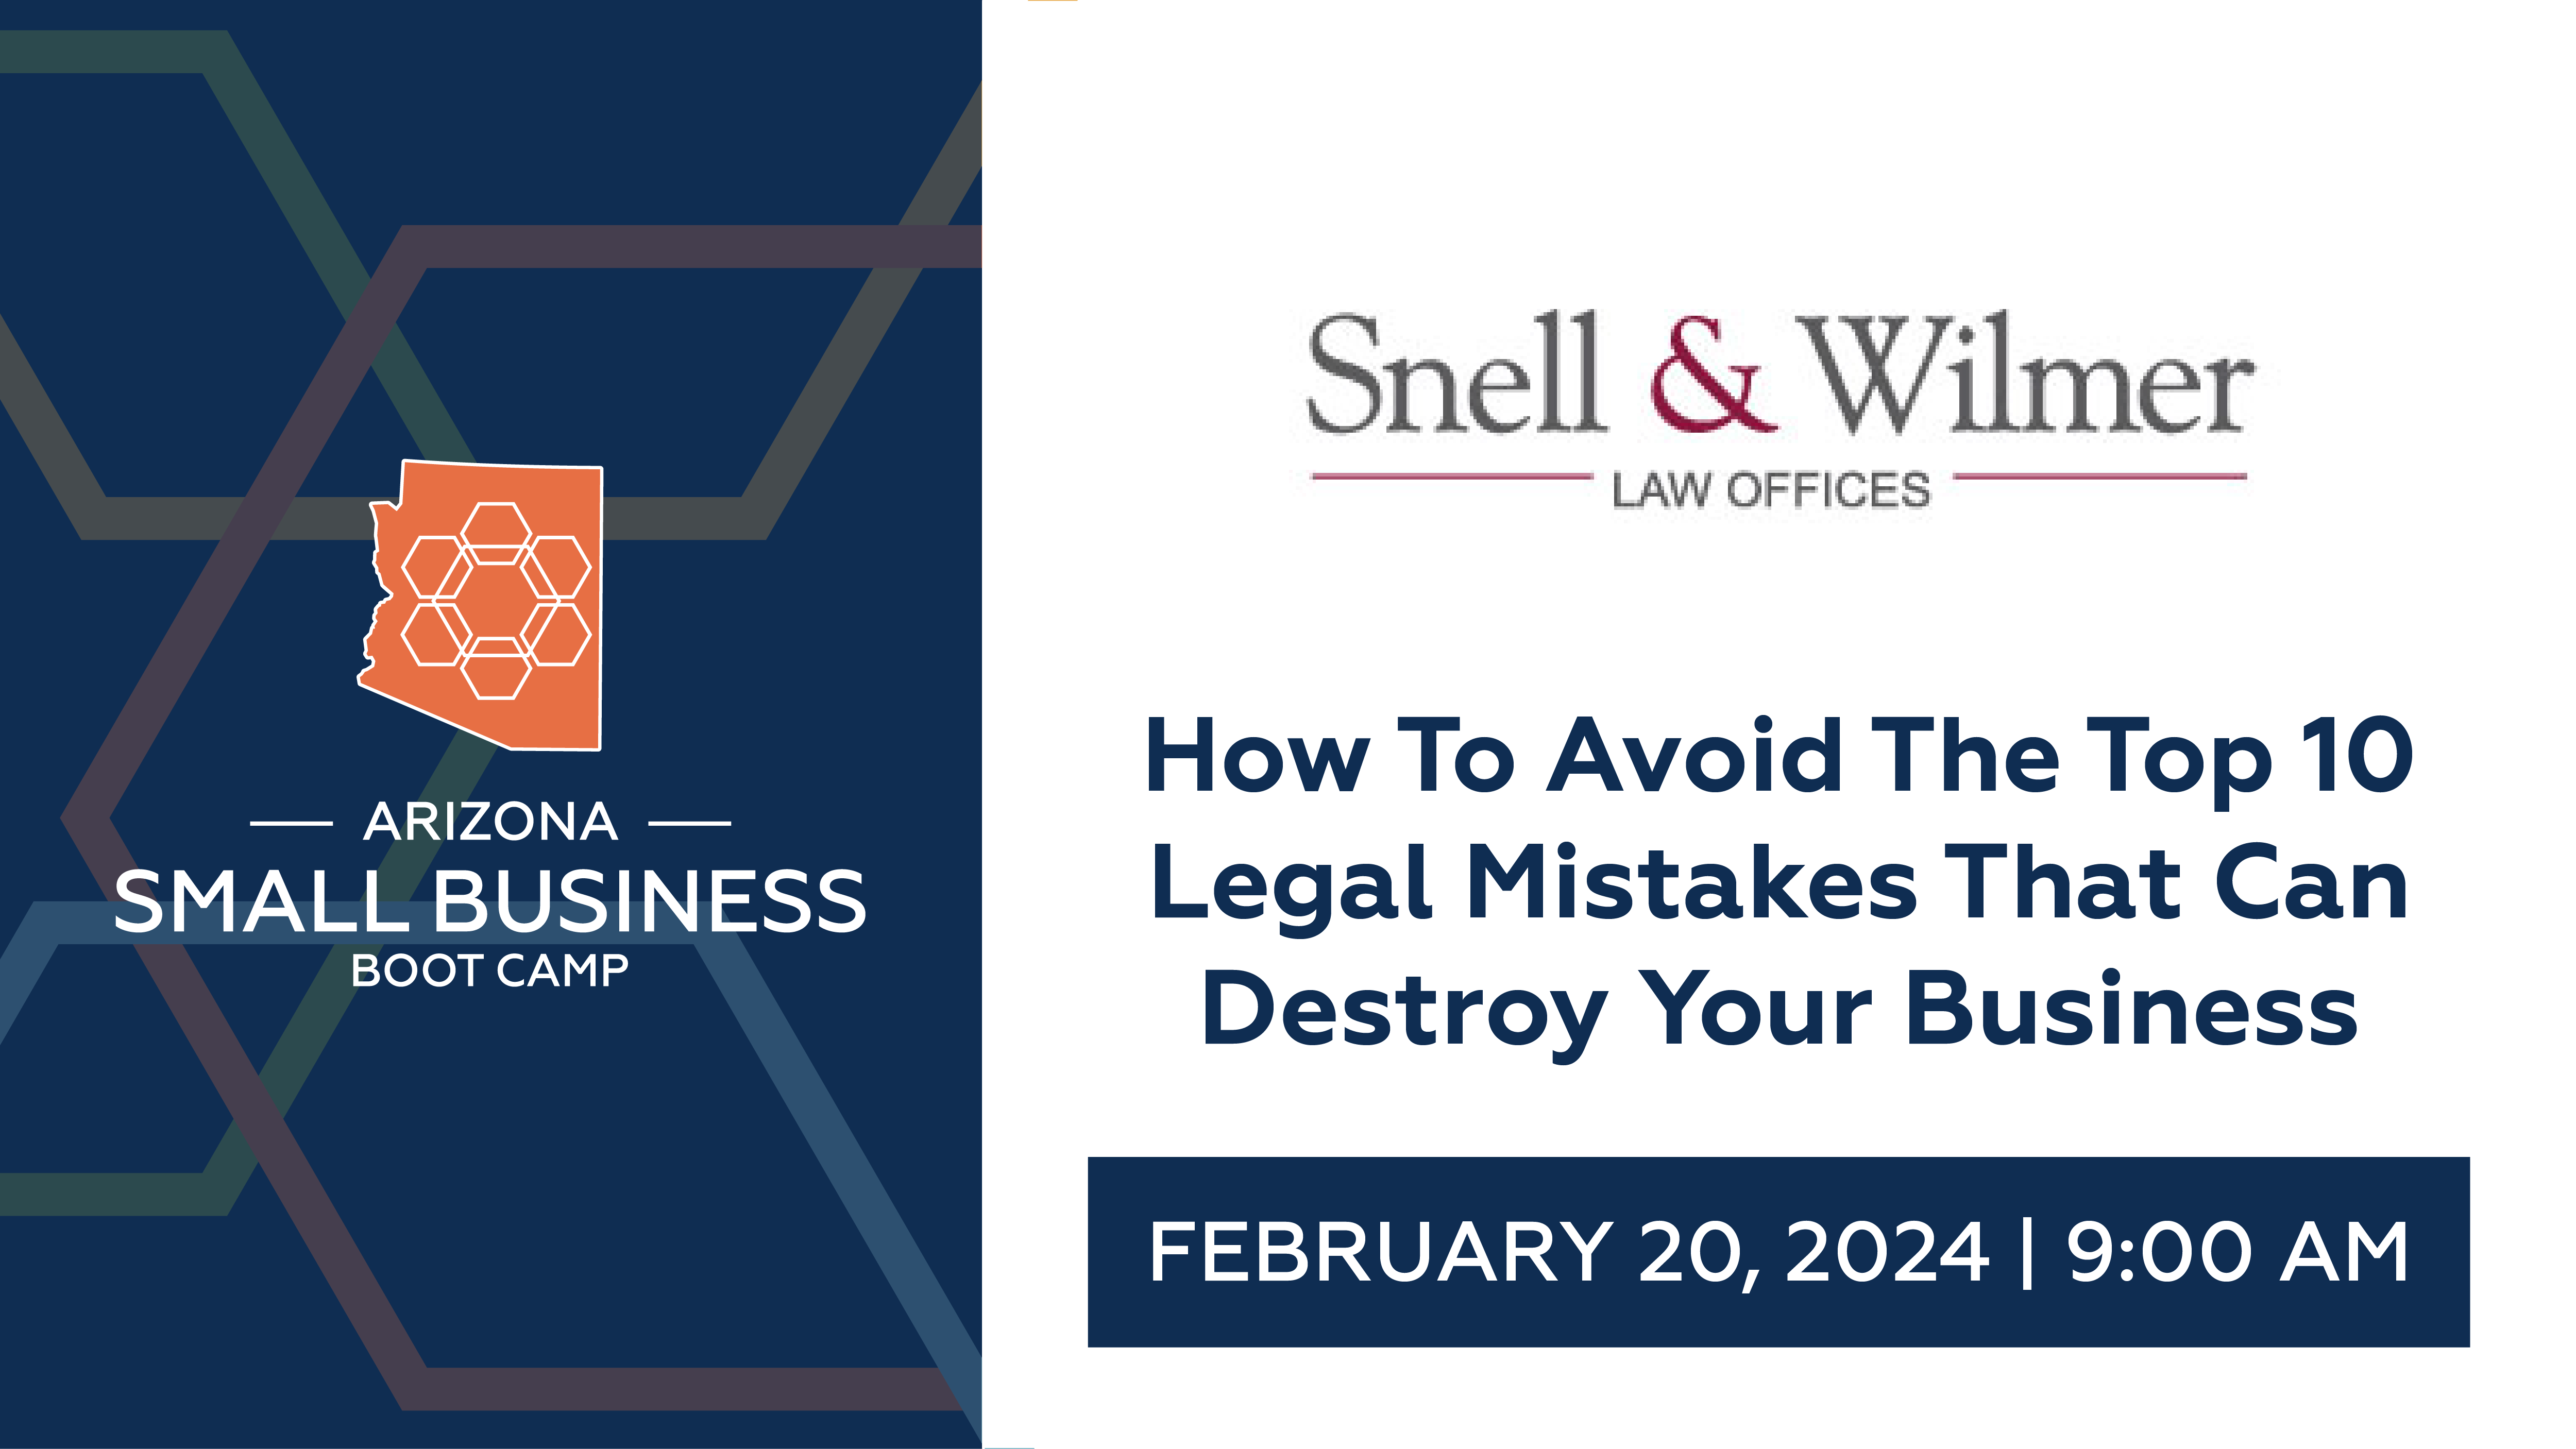  How To Avoid The Top 10 Legal Mistakes That Can Destroy Your Business